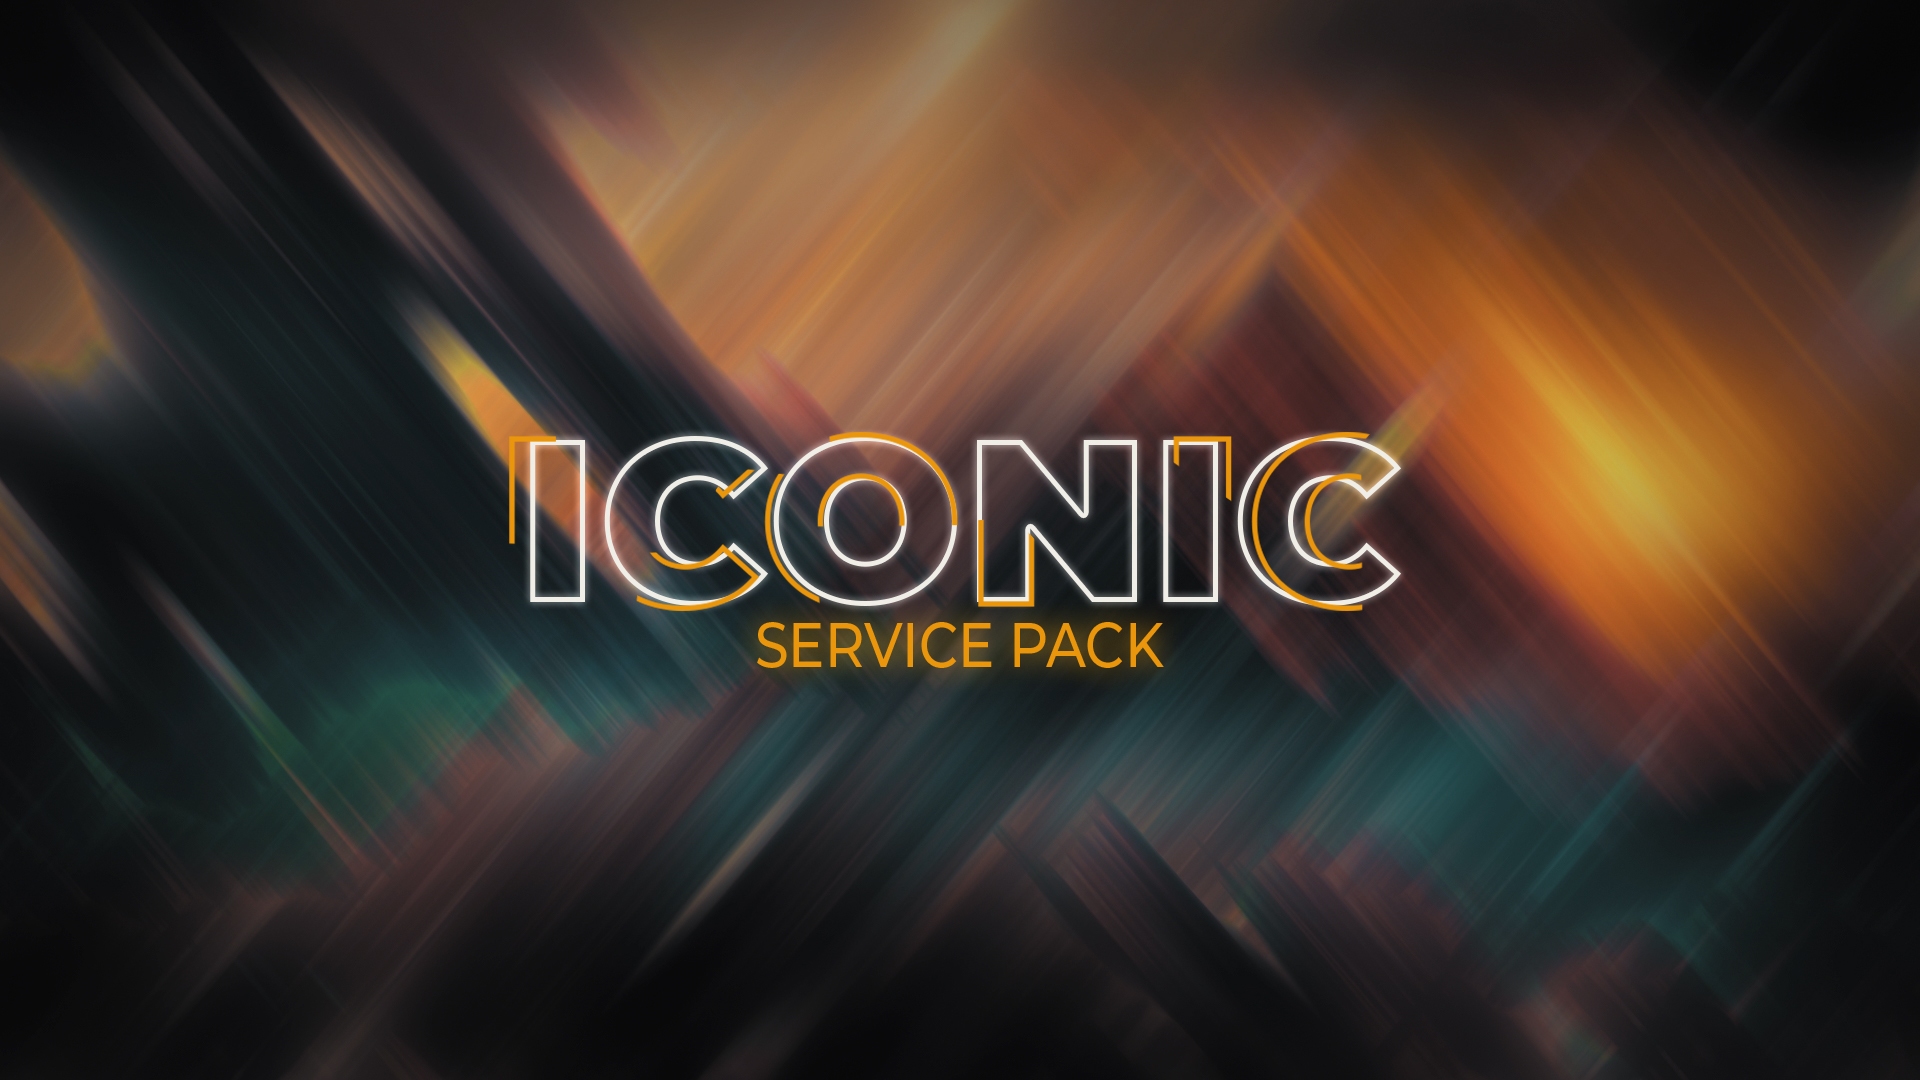 Iconic Service Pack